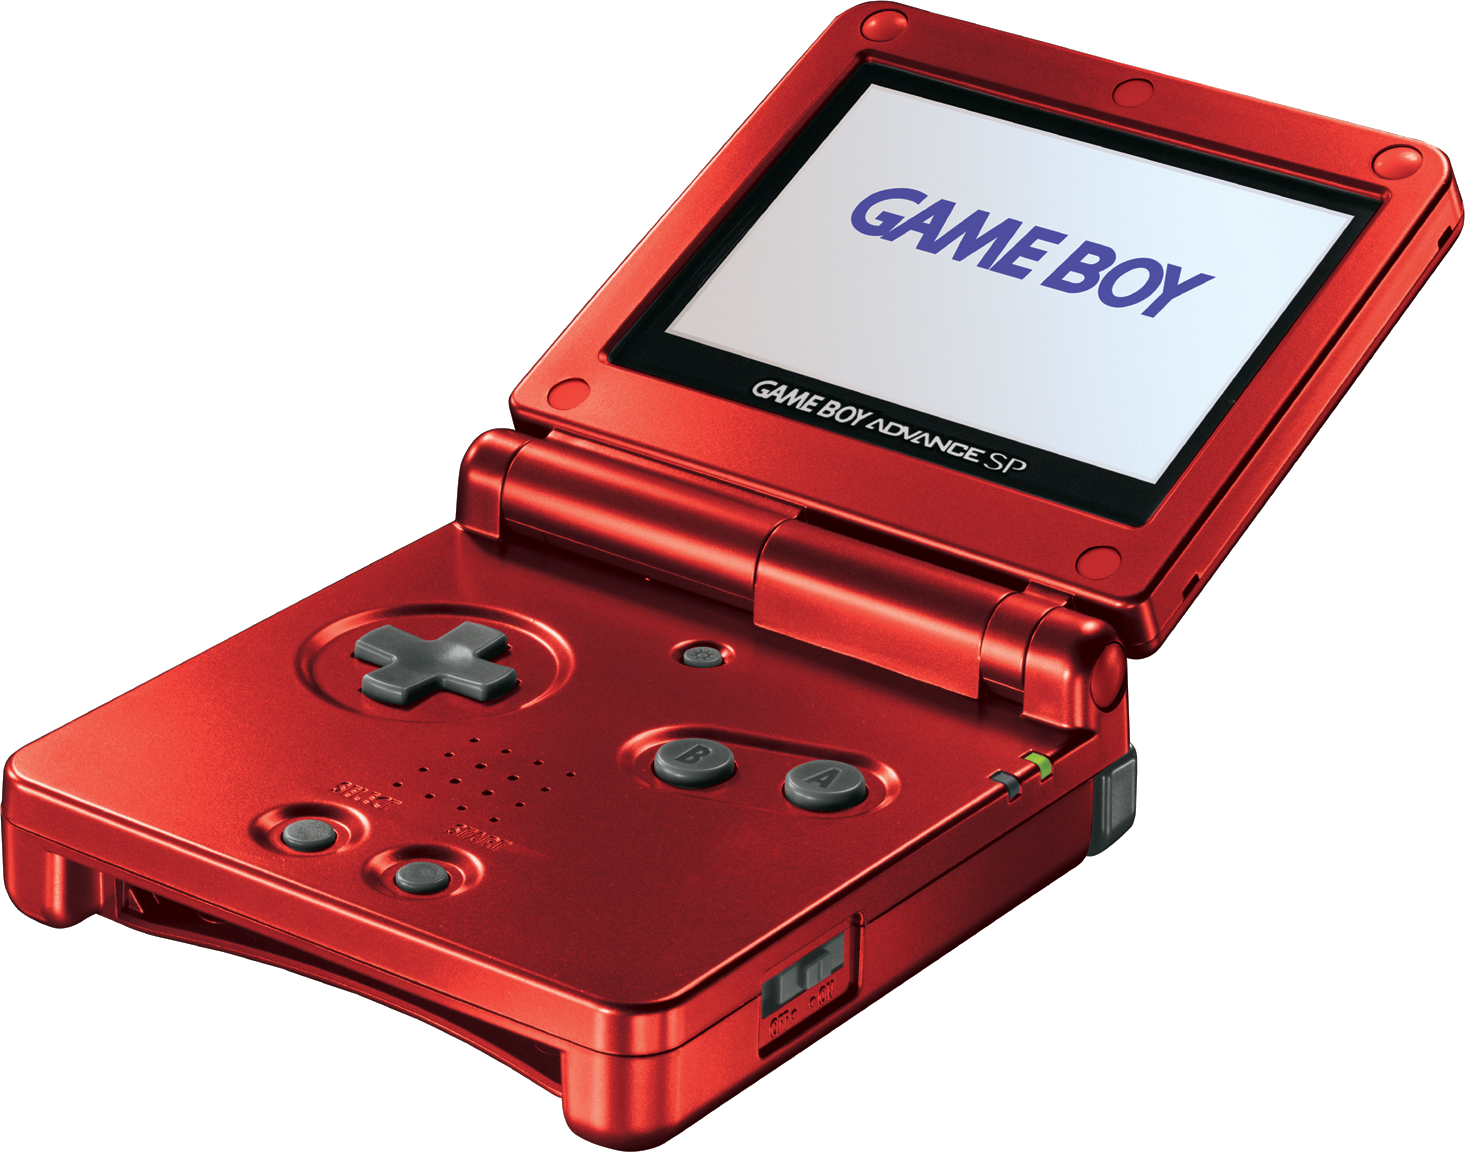 How to play Game Boy Advance games on the Nintendo Switch